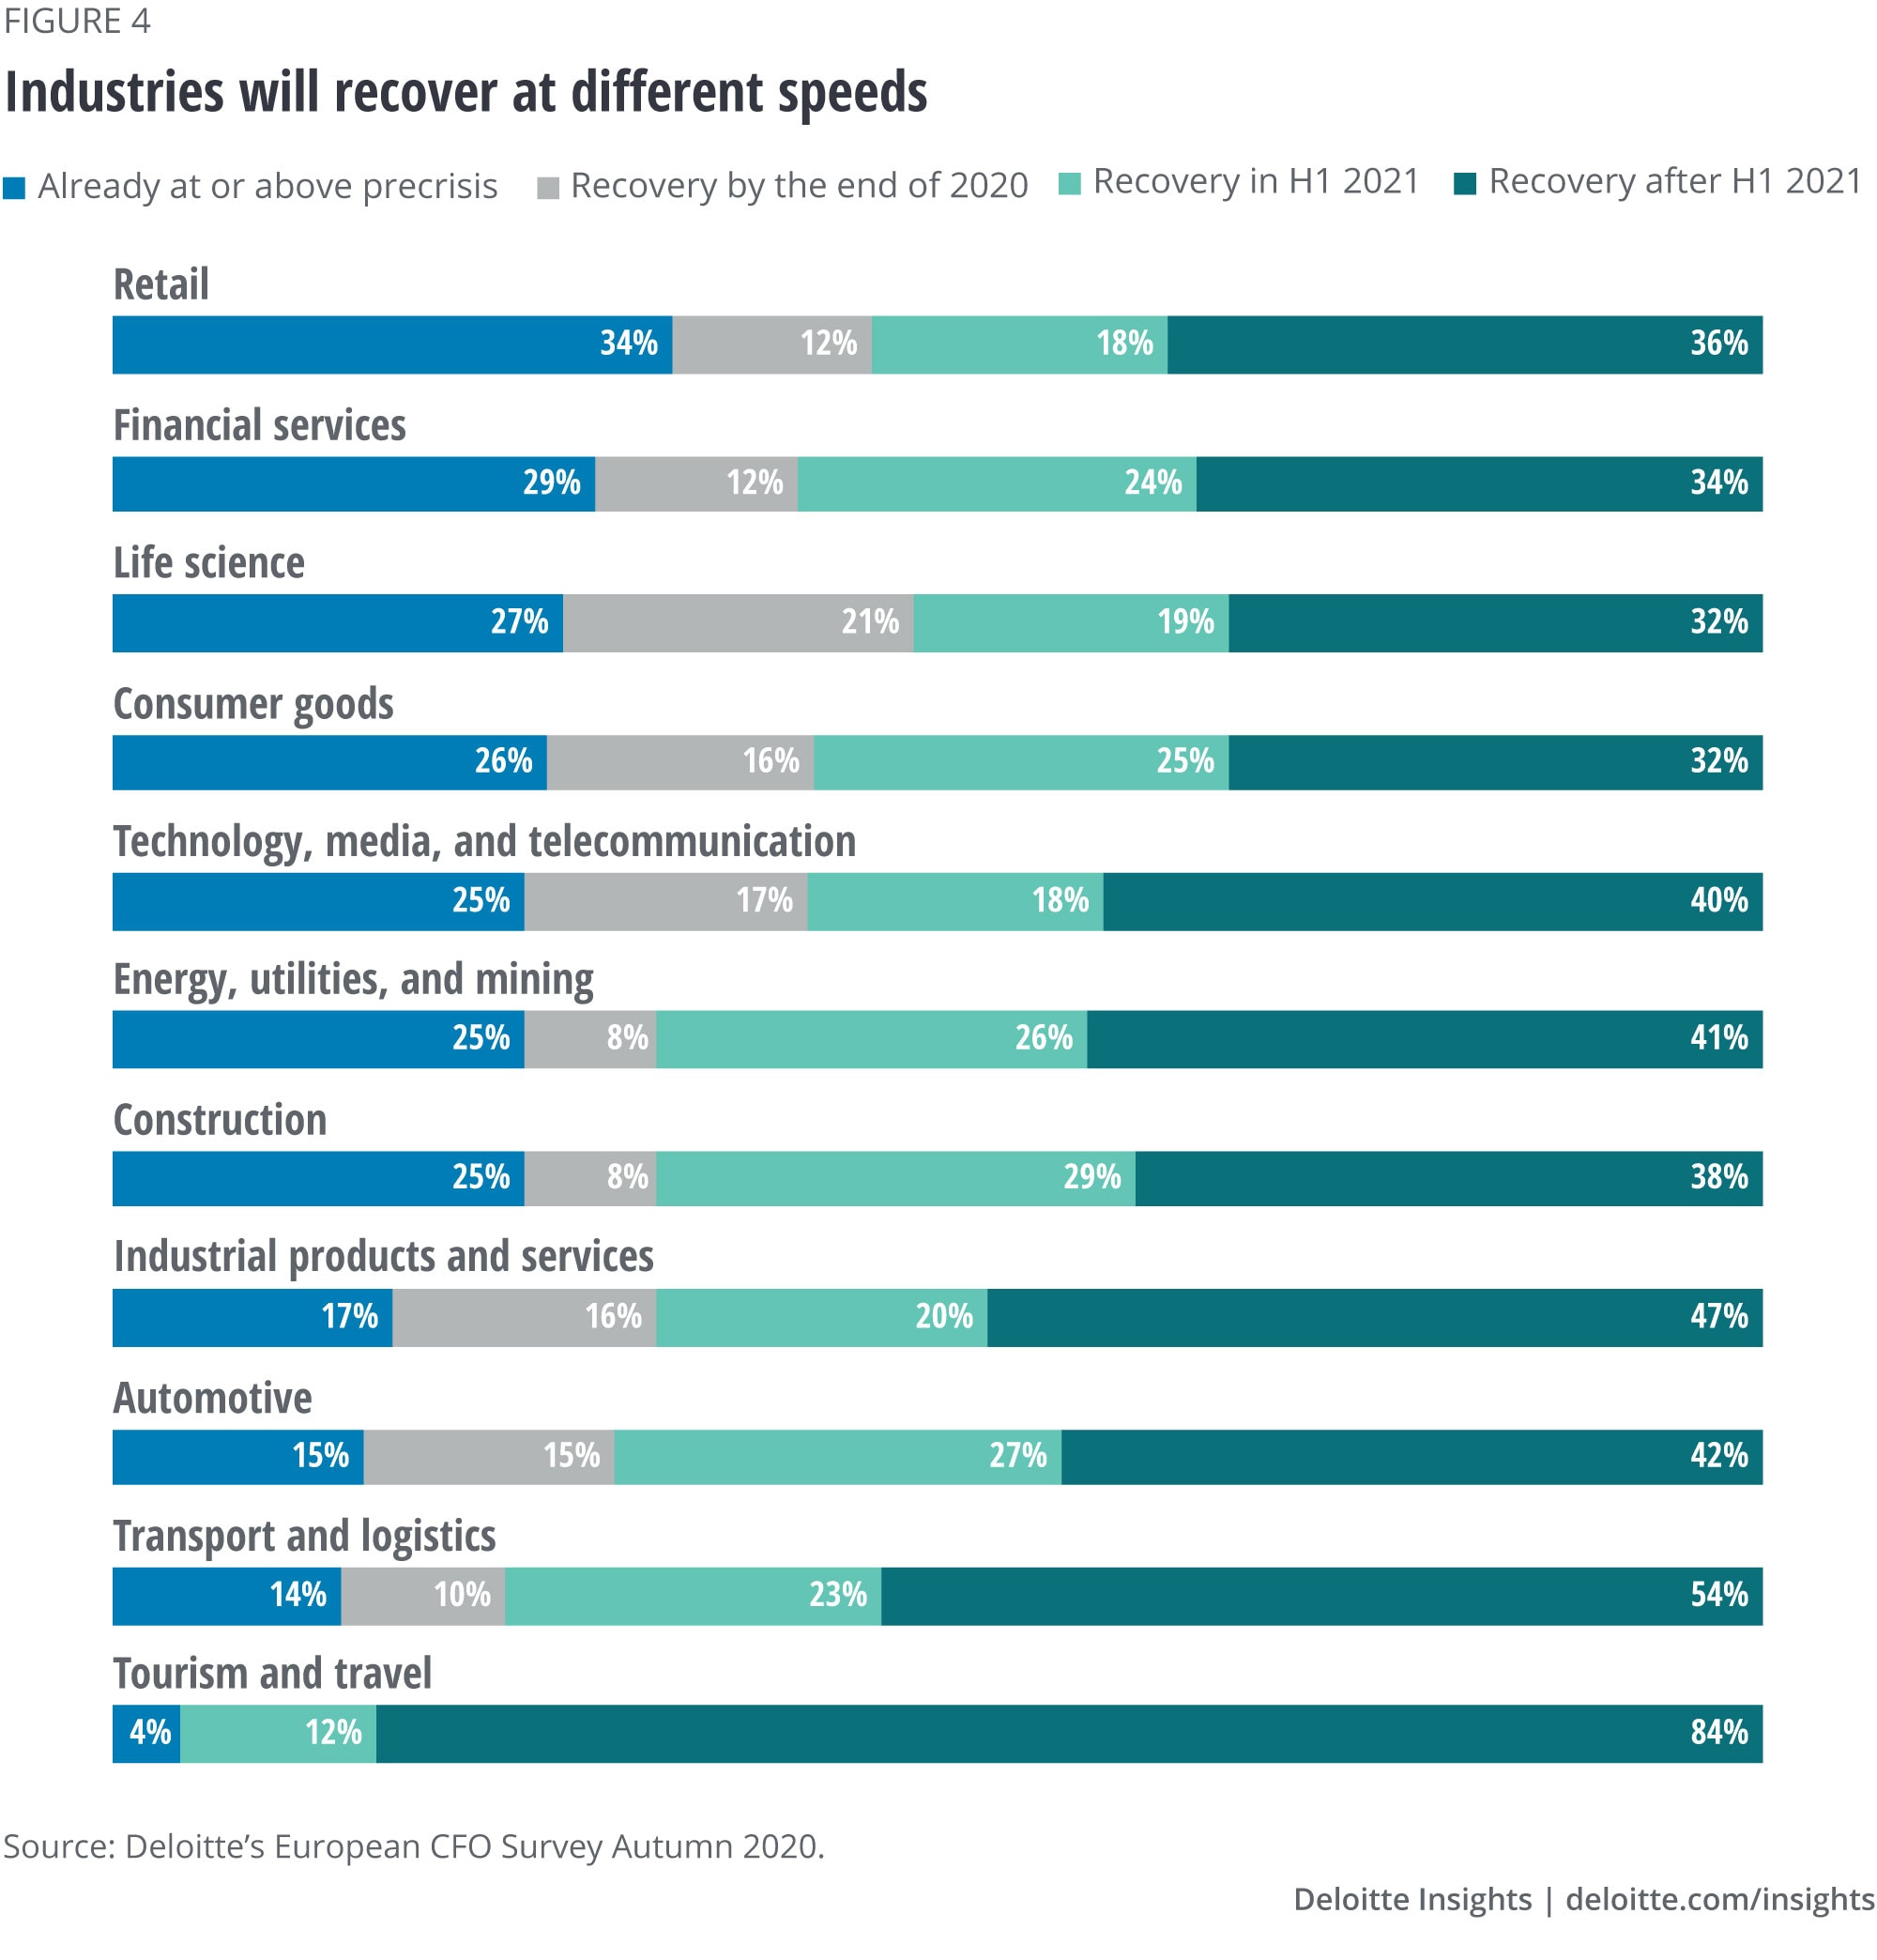 Industries will recovery at different speeds